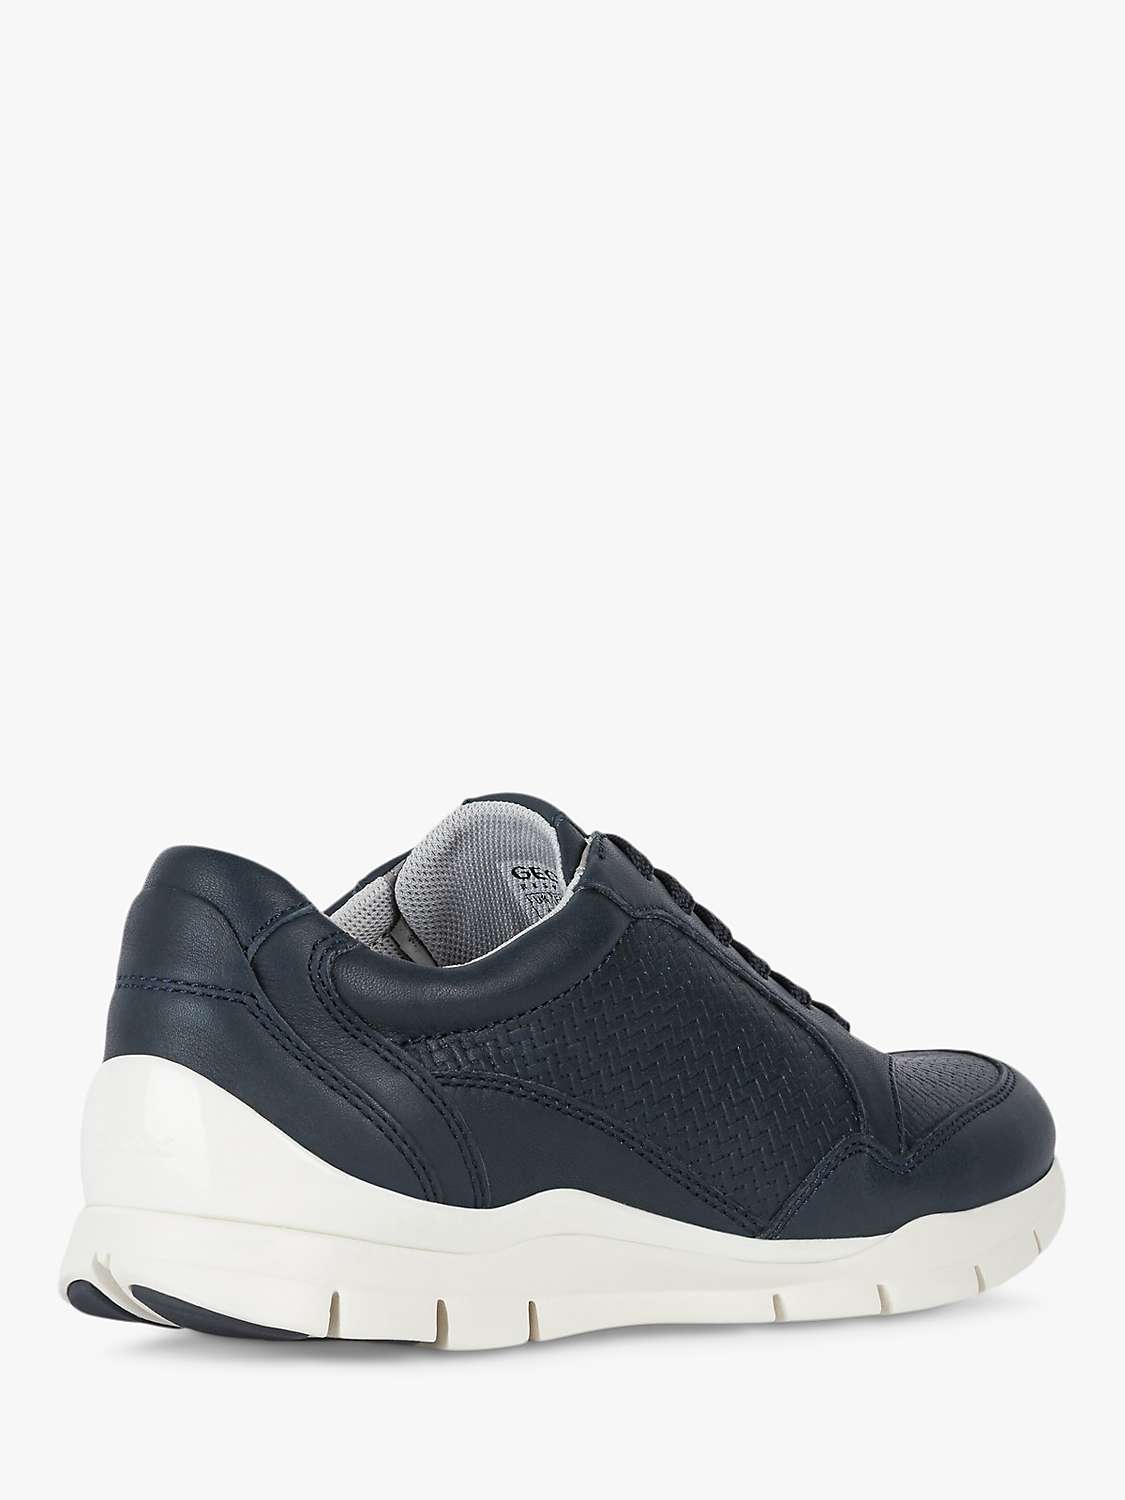 Buy Geox Sukie Leather Trainers, Navy Online at johnlewis.com